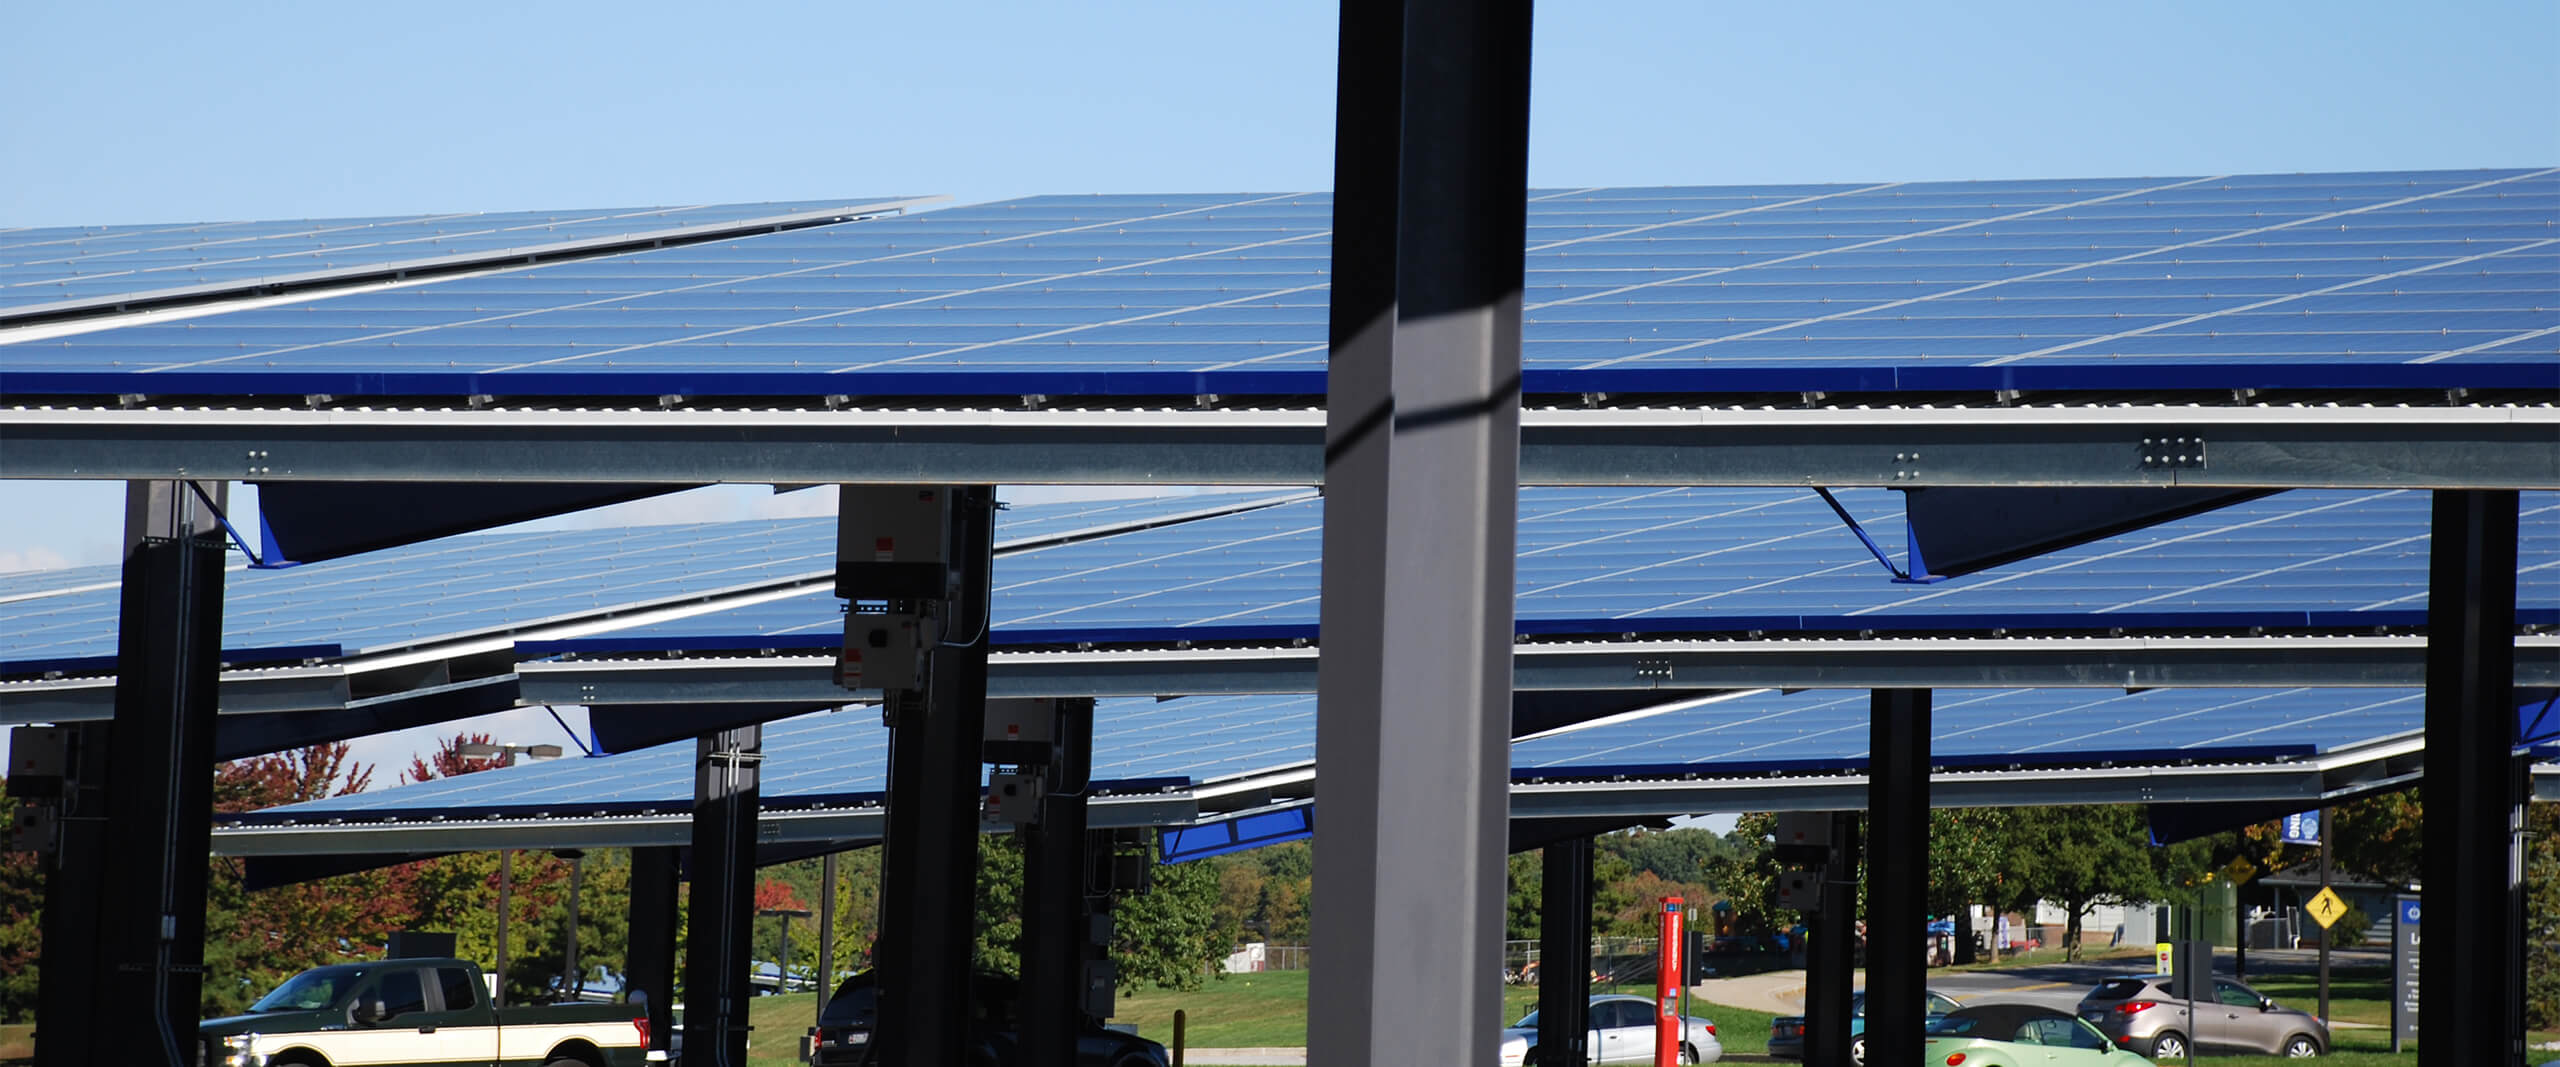 Solar panel structures provide shaded parking for vehicles